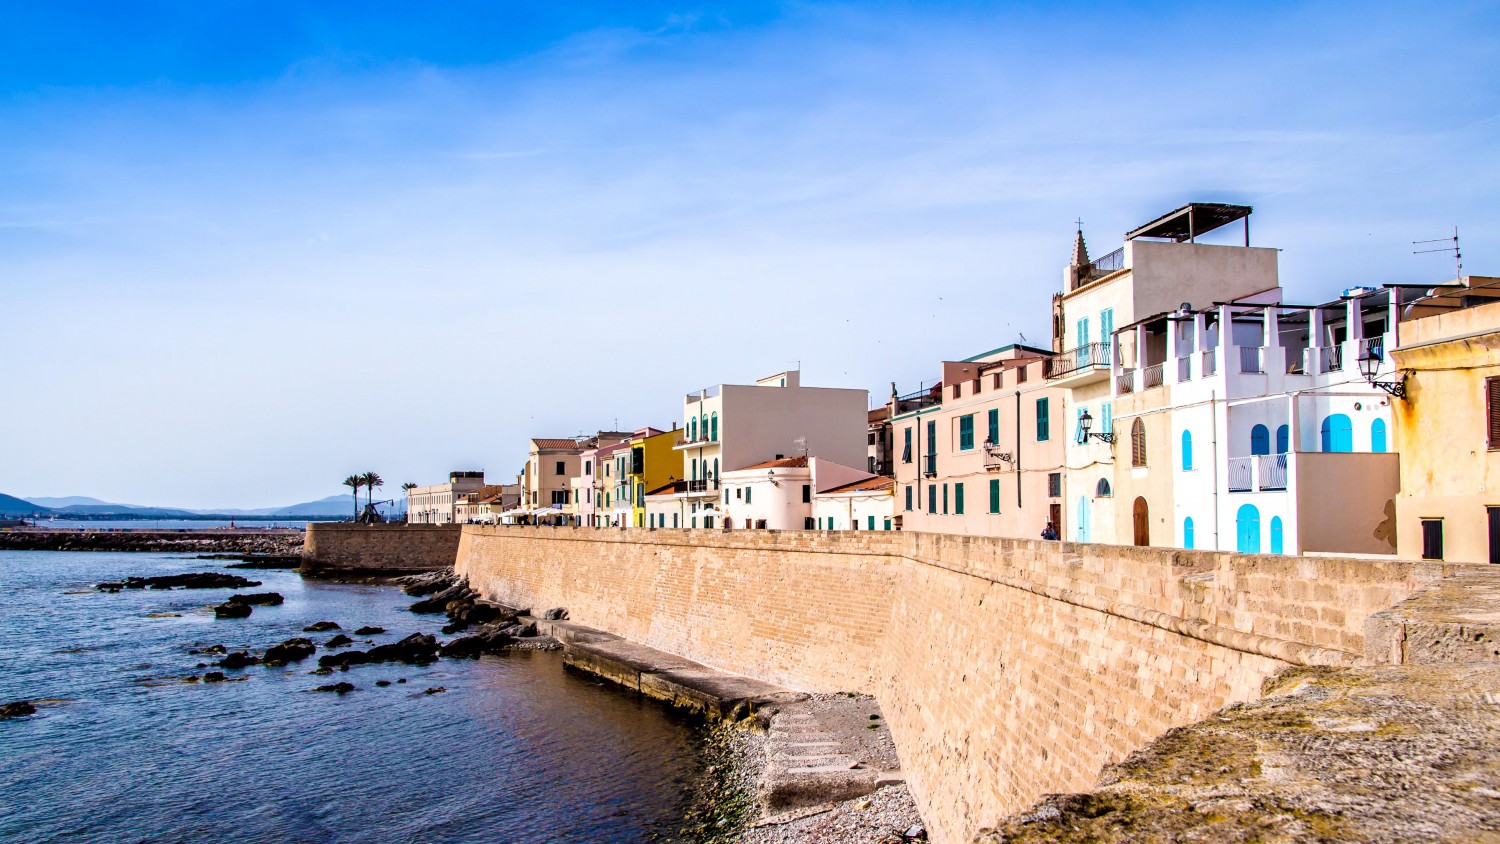 View of the promenade in the downtown of Alghero, Sardinia